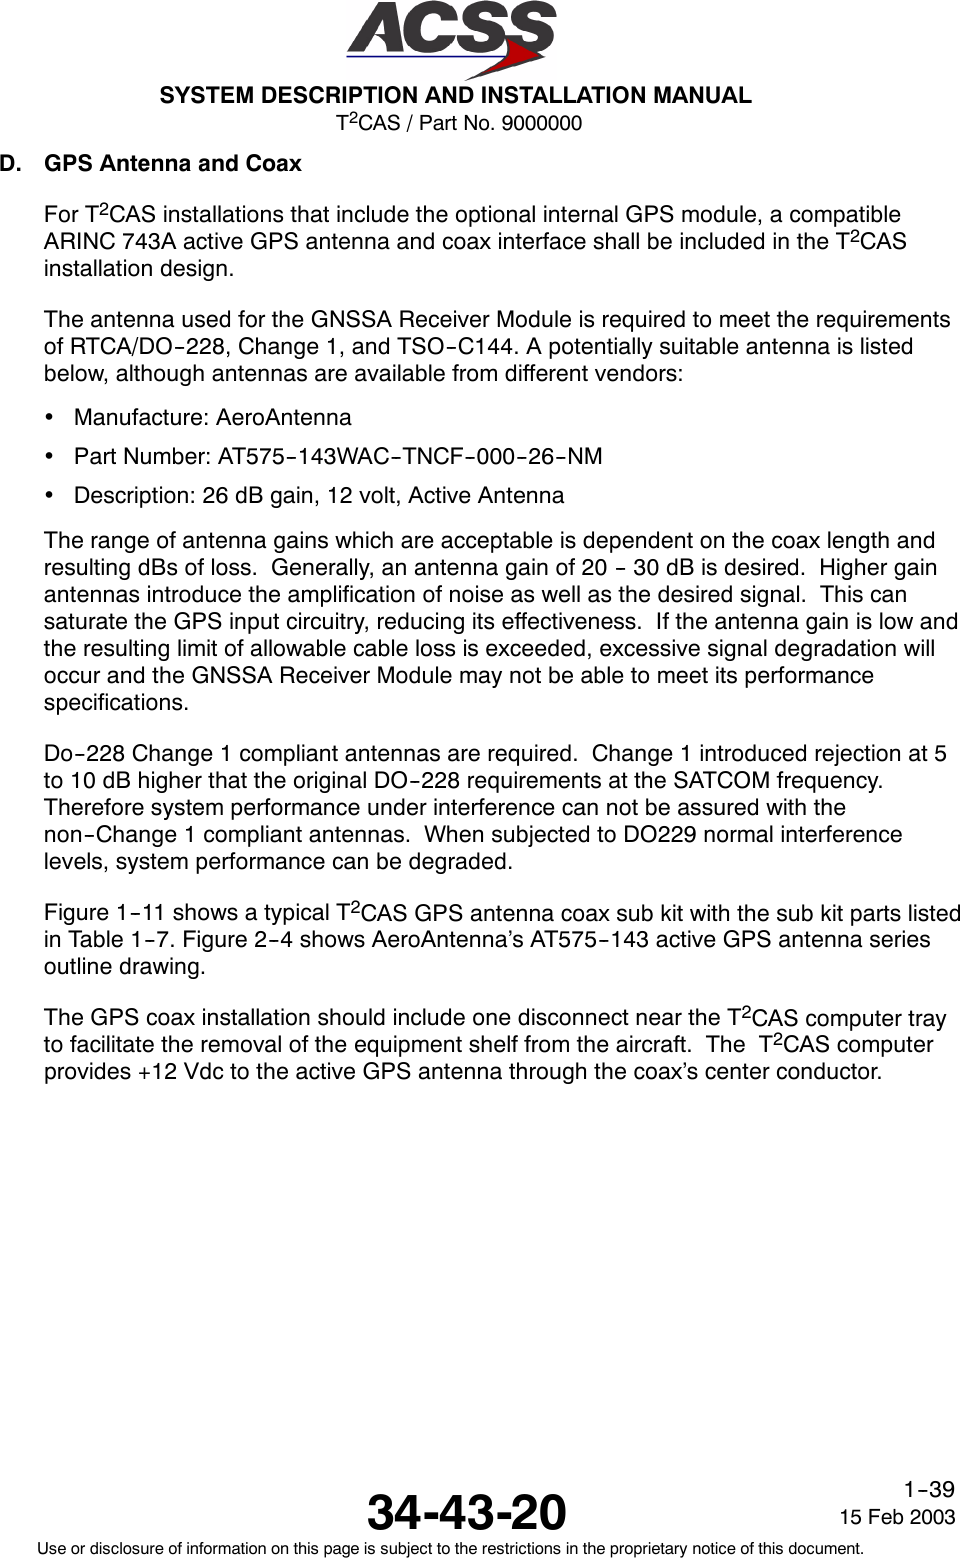 T2CAS / Part No. 9000000SYSTEM DESCRIPTION AND INSTALLATION MANUAL34-43-20 15 Feb 2003Use or disclosure of information on this page is subject to the restrictions in the proprietary notice of this document.1--39D. GPS Antenna and CoaxFor T2CAS installations that include the optional internal GPS module, a compatibleARINC 743A active GPS antenna and coax interface shall be included in the T2CASinstallation design.The antenna used for the GNSSA Receiver Module is required to meet the requirementsof RTCA/DO--228, Change 1, and TSO--C144. A potentially suitable antenna is listedbelow, although antennas are available from different vendors:•Manufacture: AeroAntenna•Part Number: AT575--143WAC--TNCF--000--26--NM•Description: 26 dB gain, 12 volt, Active AntennaThe range of antenna gains which are acceptable is dependent on the coax length andresulting dBs of loss. Generally, an antenna gain of 20 -- 30 dB is desired. Higher gainantennas introduce the amplification of noise as well as the desired signal. This cansaturate the GPS input circuitry, reducing its effectiveness. If the antenna gain is low andthe resulting limit of allowable cable loss is exceeded, excessive signal degradation willoccur and the GNSSA Receiver Module may not be able to meet its performancespecifications.Do--228 Change 1 compliant antennas are required. Change 1 introduced rejection at 5to 10 dB higher that the original DO--228 requirements at the SATCOM frequency.Therefore system performance under interference can not be assured with thenon--Change 1 compliant antennas. When subjected to DO229 normal interferencelevels, system performance can be degraded.Figure 1--11 shows a typical T2CAS GPS antenna coax sub kit with the sub kit parts listedin Table 1--7. Figure 2--4 shows AeroAntenna’s AT575--143 active GPS antenna seriesoutline drawing.The GPS coax installation should include one disconnect near the T2CAS computer trayto facilitate the removal of the equipment shelf from the aircraft. The T2CAS computerprovides +12 Vdc to the active GPS antenna through the coax’s center conductor.